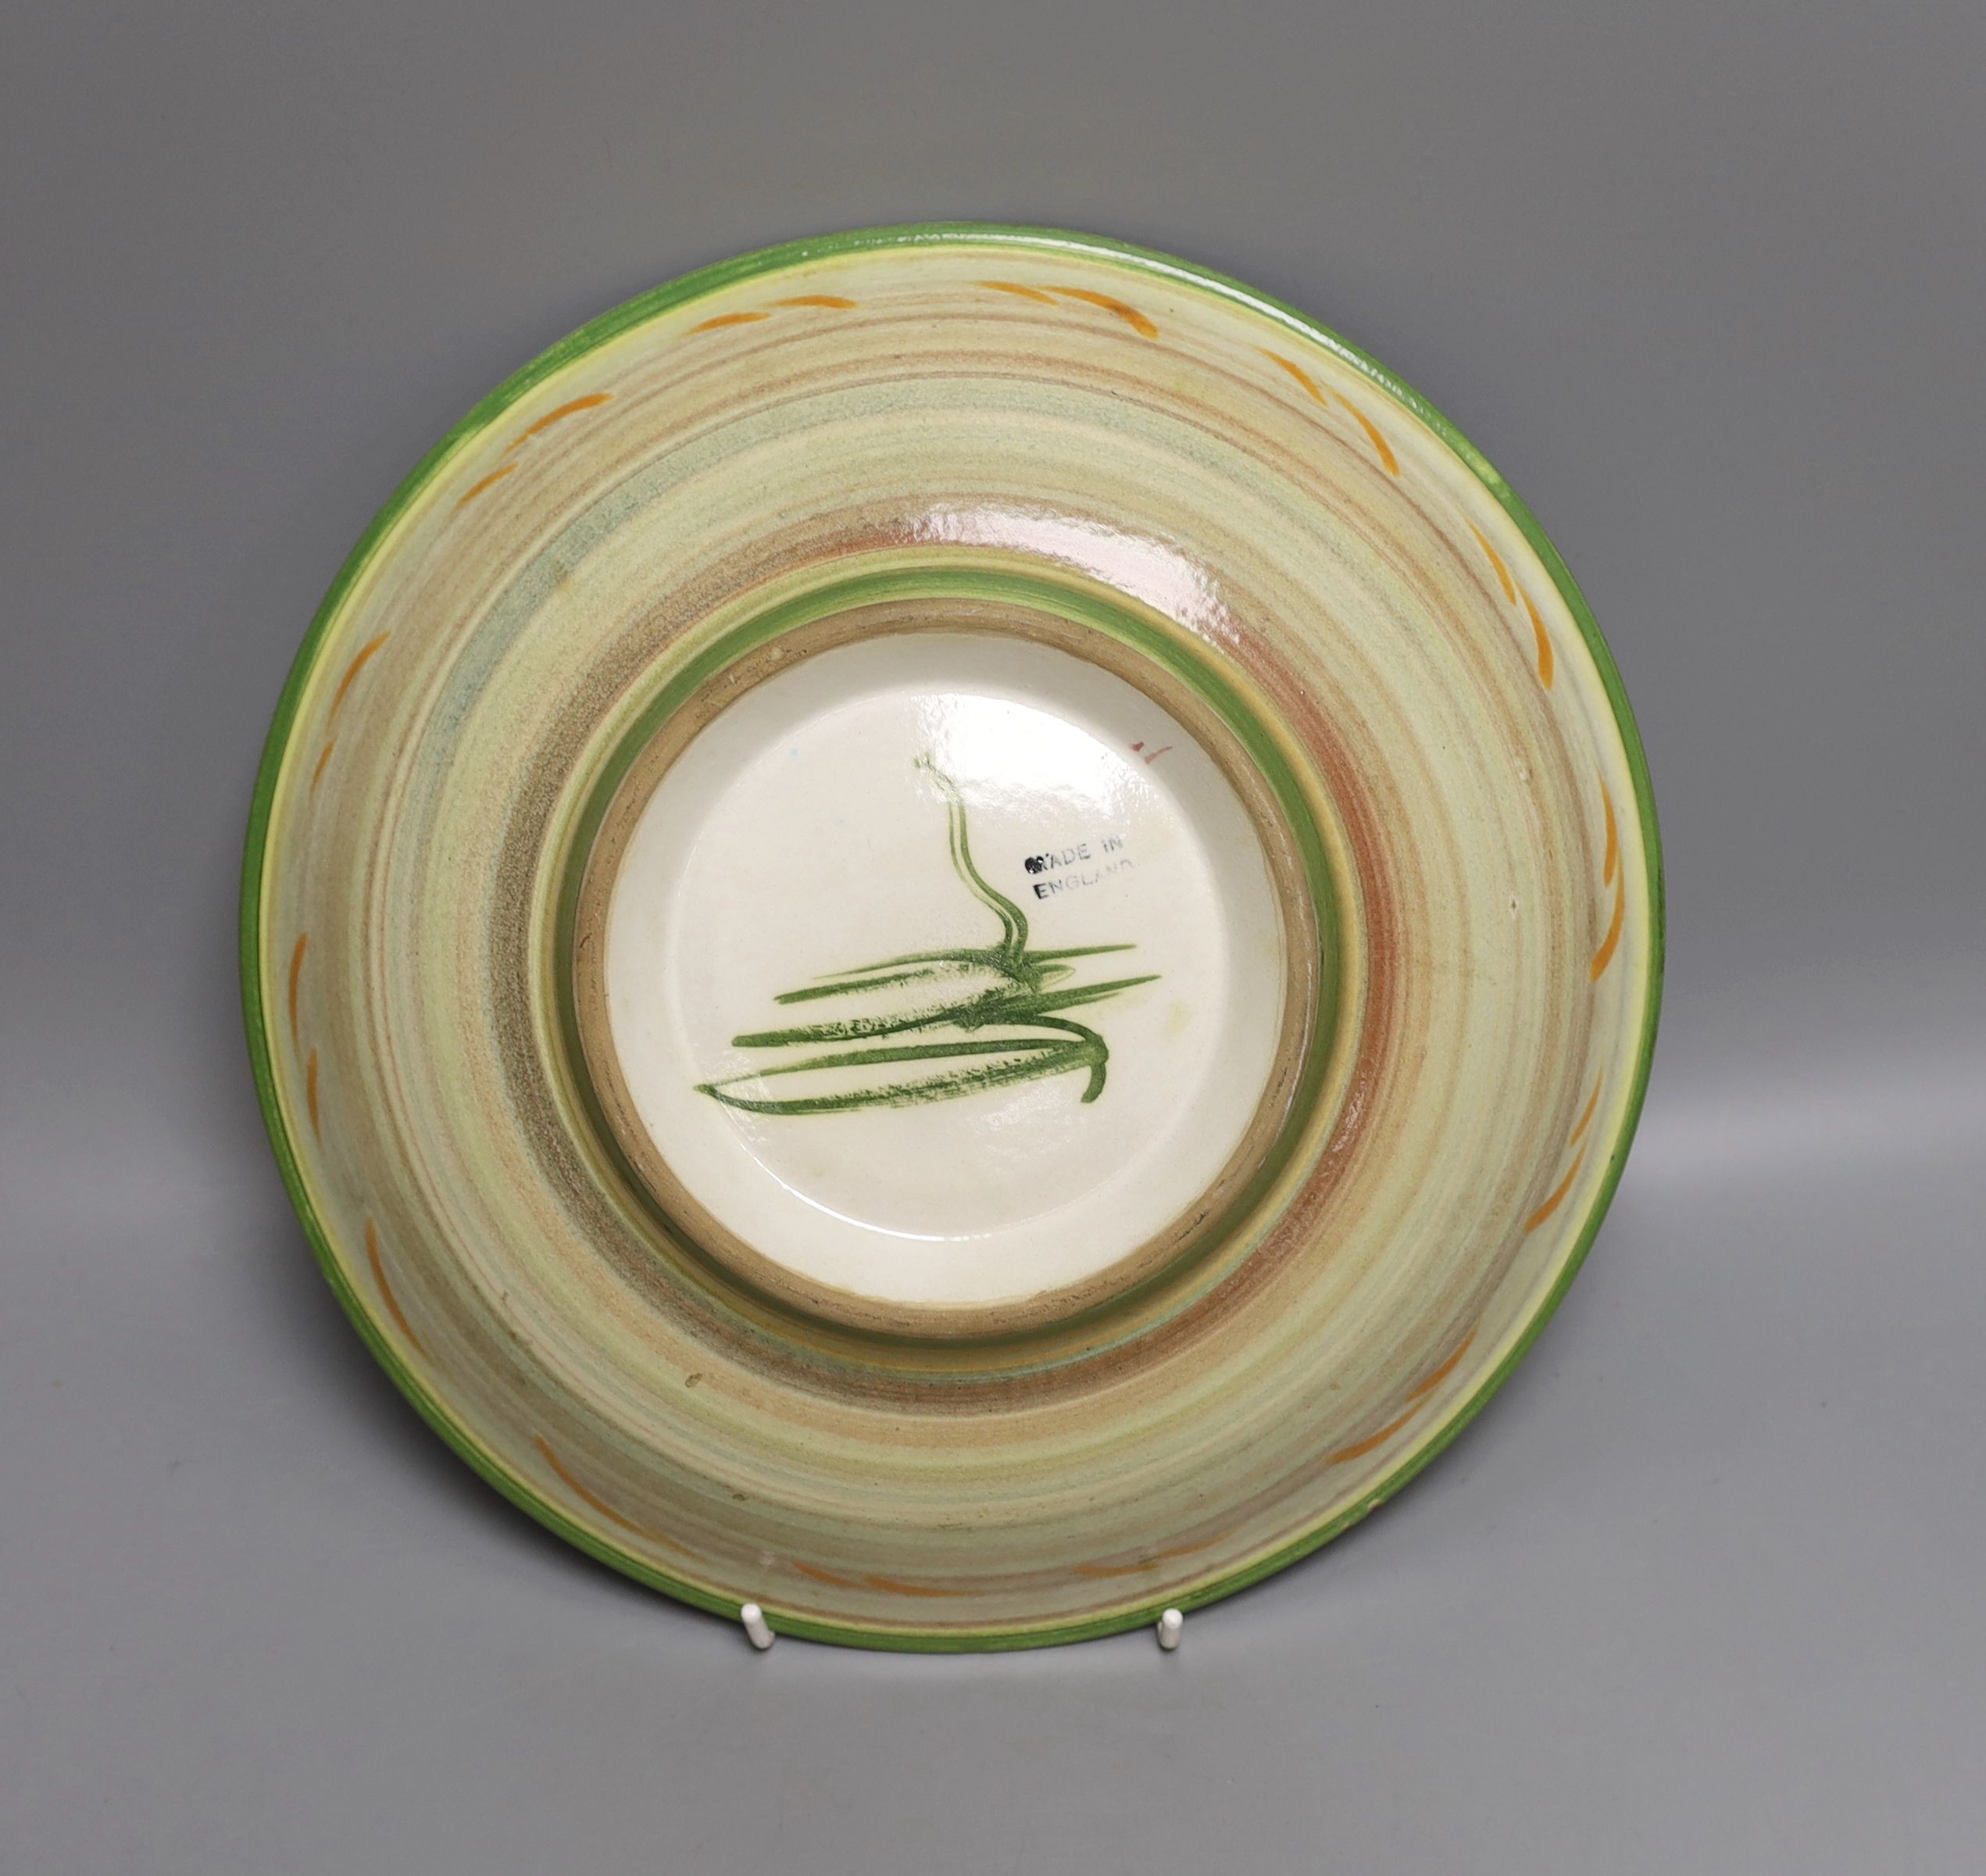 A painted studio pottery dish - 29cm diameter - Image 2 of 2